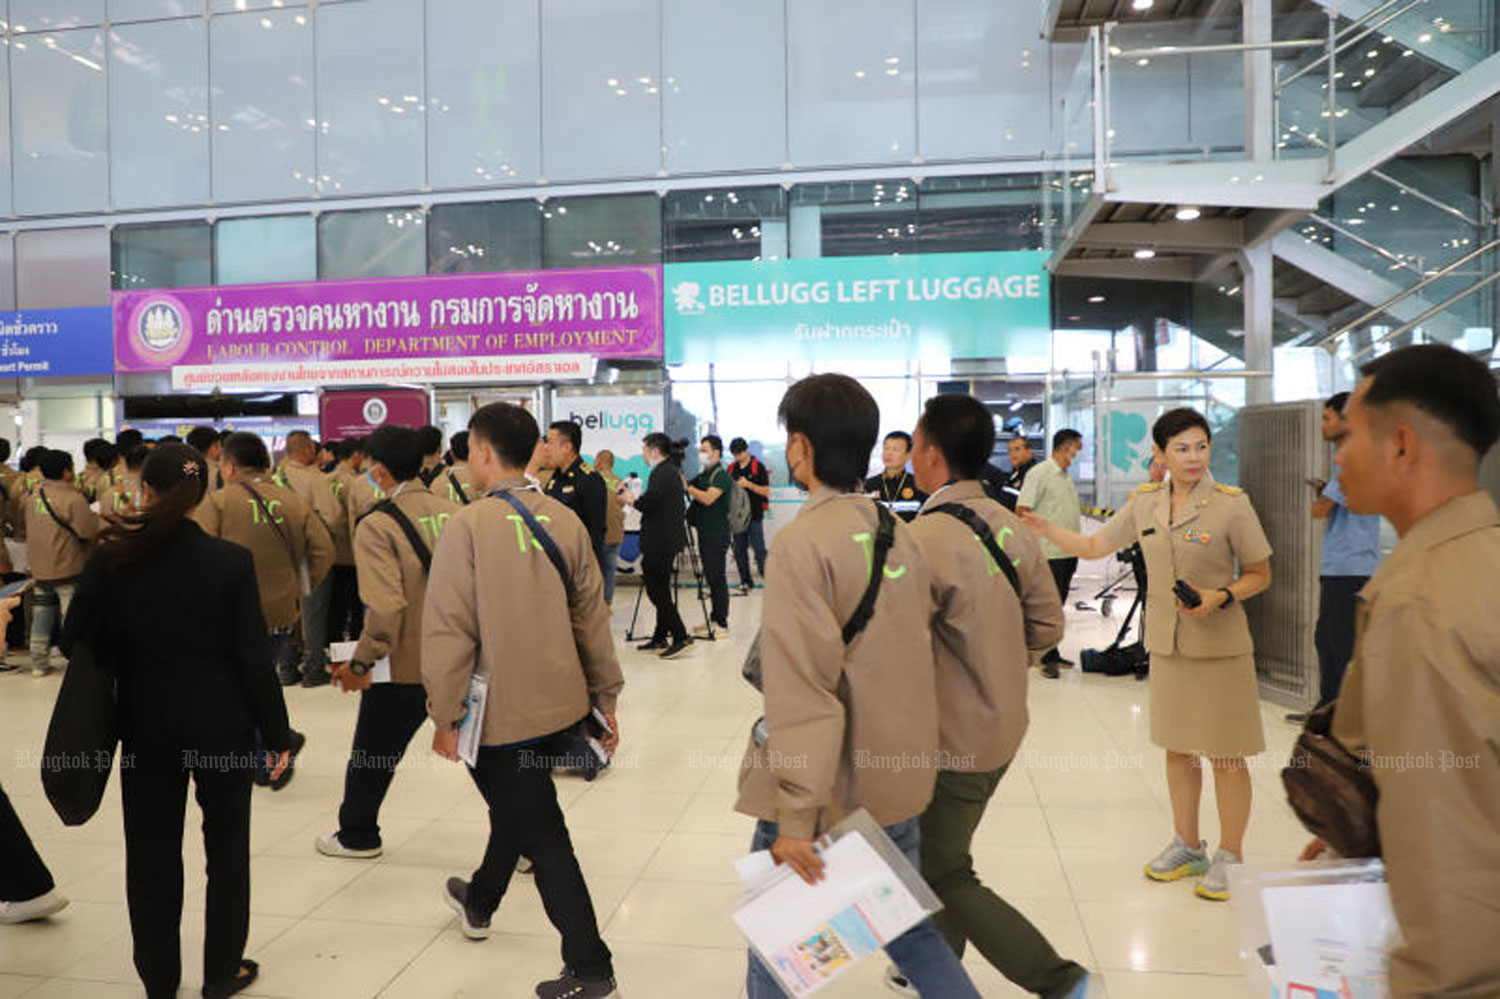 Thai workers prepare to board a flight to Israel at Suvarnabhumi airport on June 25. The House's foreign affairs committee has urged the Foreign Ministry to speed up renewing passports for Thai workers in South Korea. (Photo: Varuth Hirunyatheb)